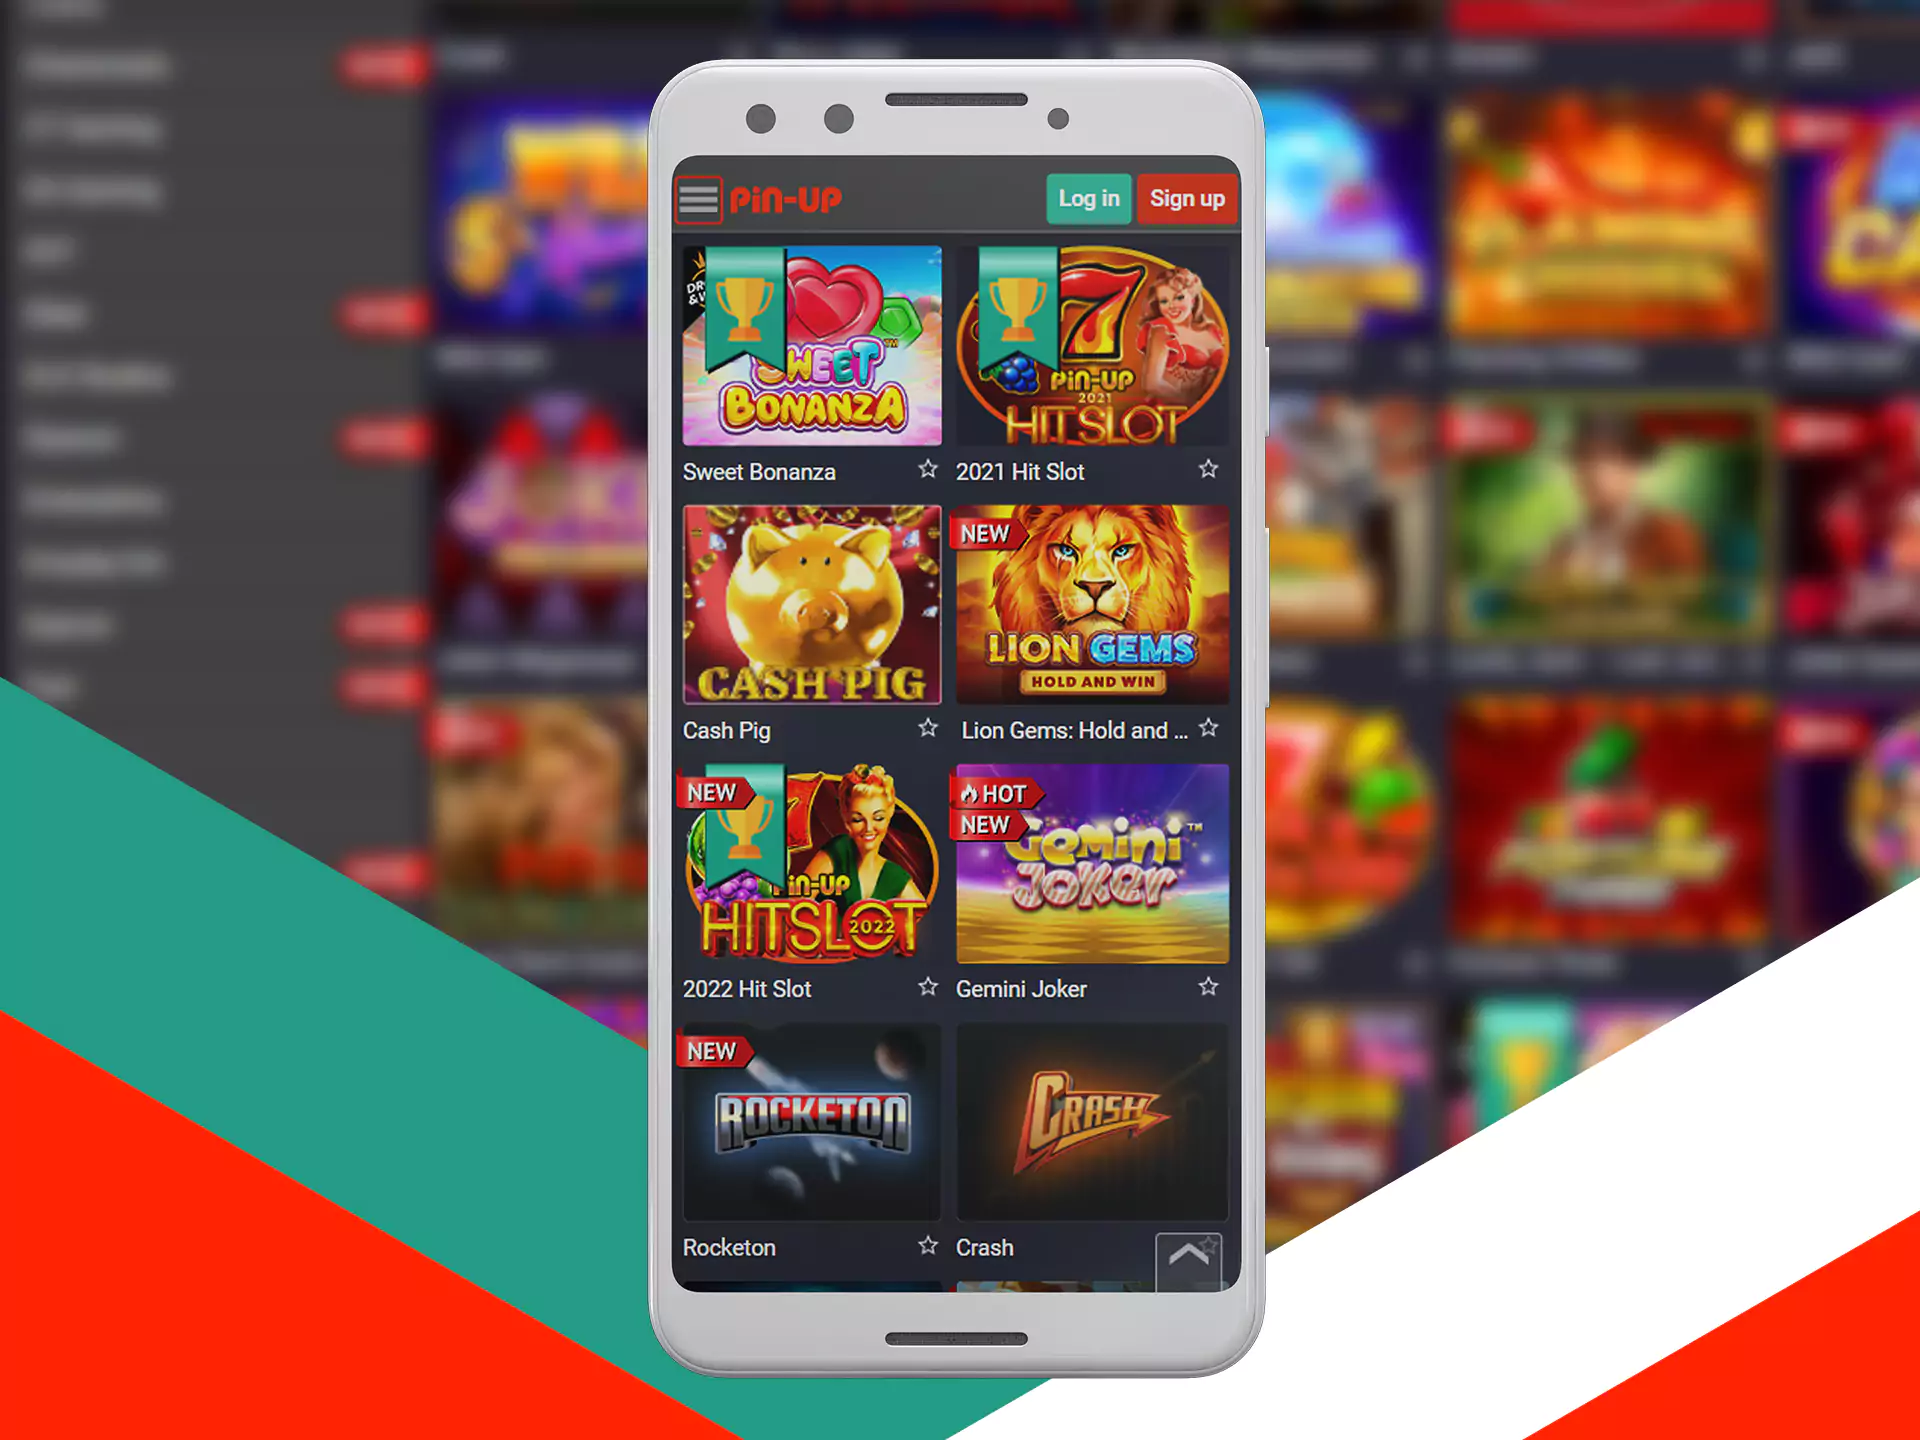 Pin-Up casino app is up-to-date and easy to use.